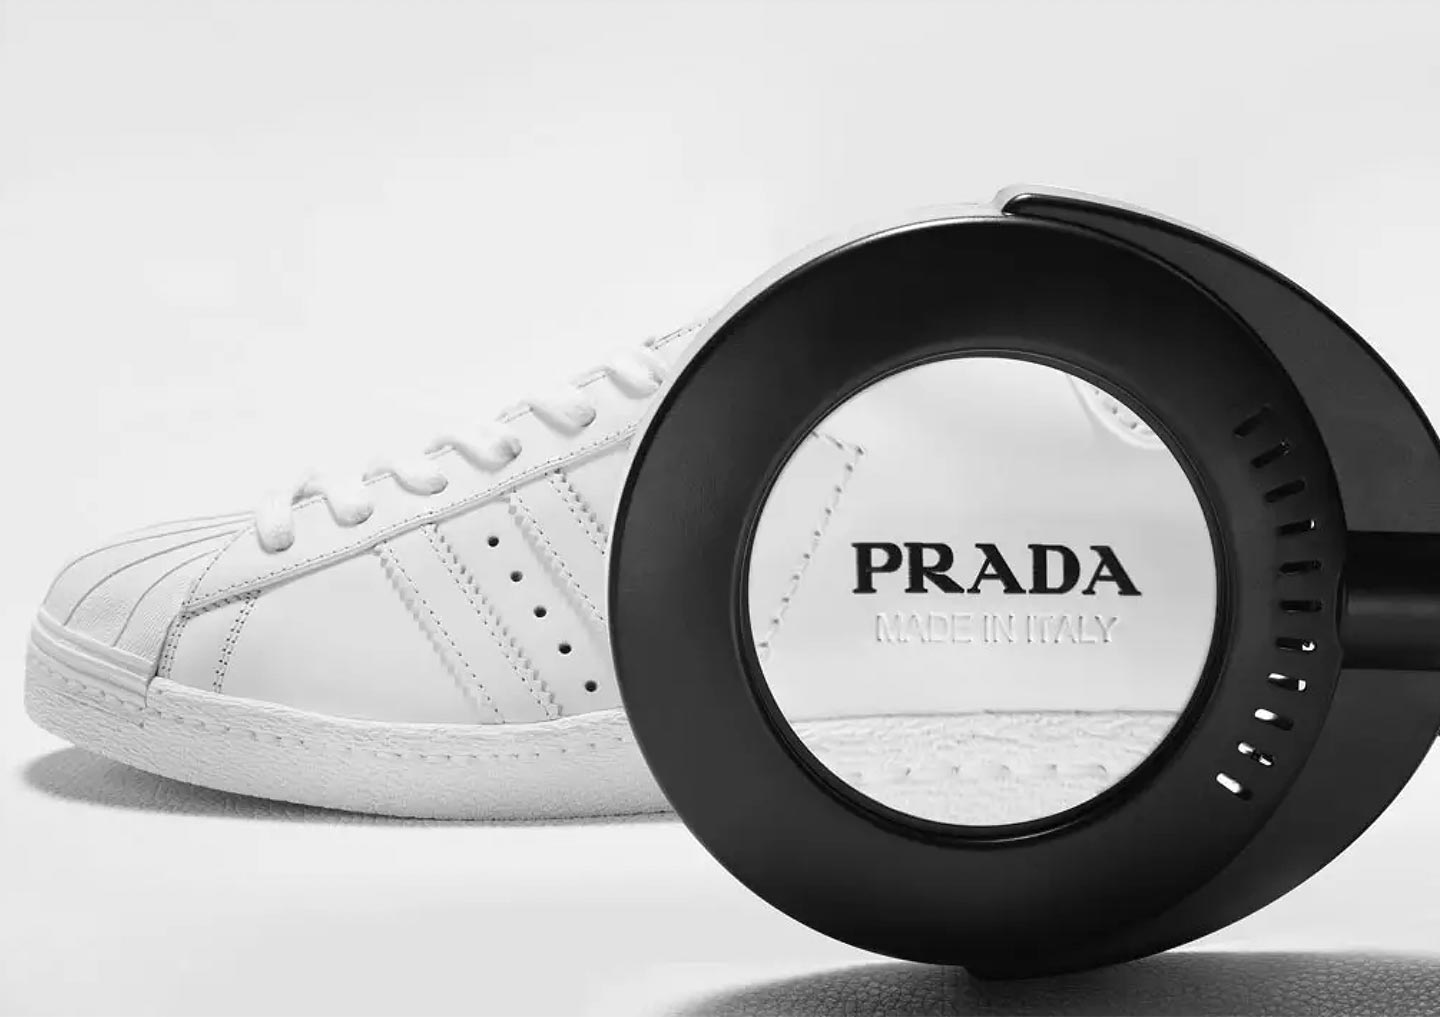 Almost three years ago, Prada and Adidas officially unveiled their first collaborative Superstar sneaker